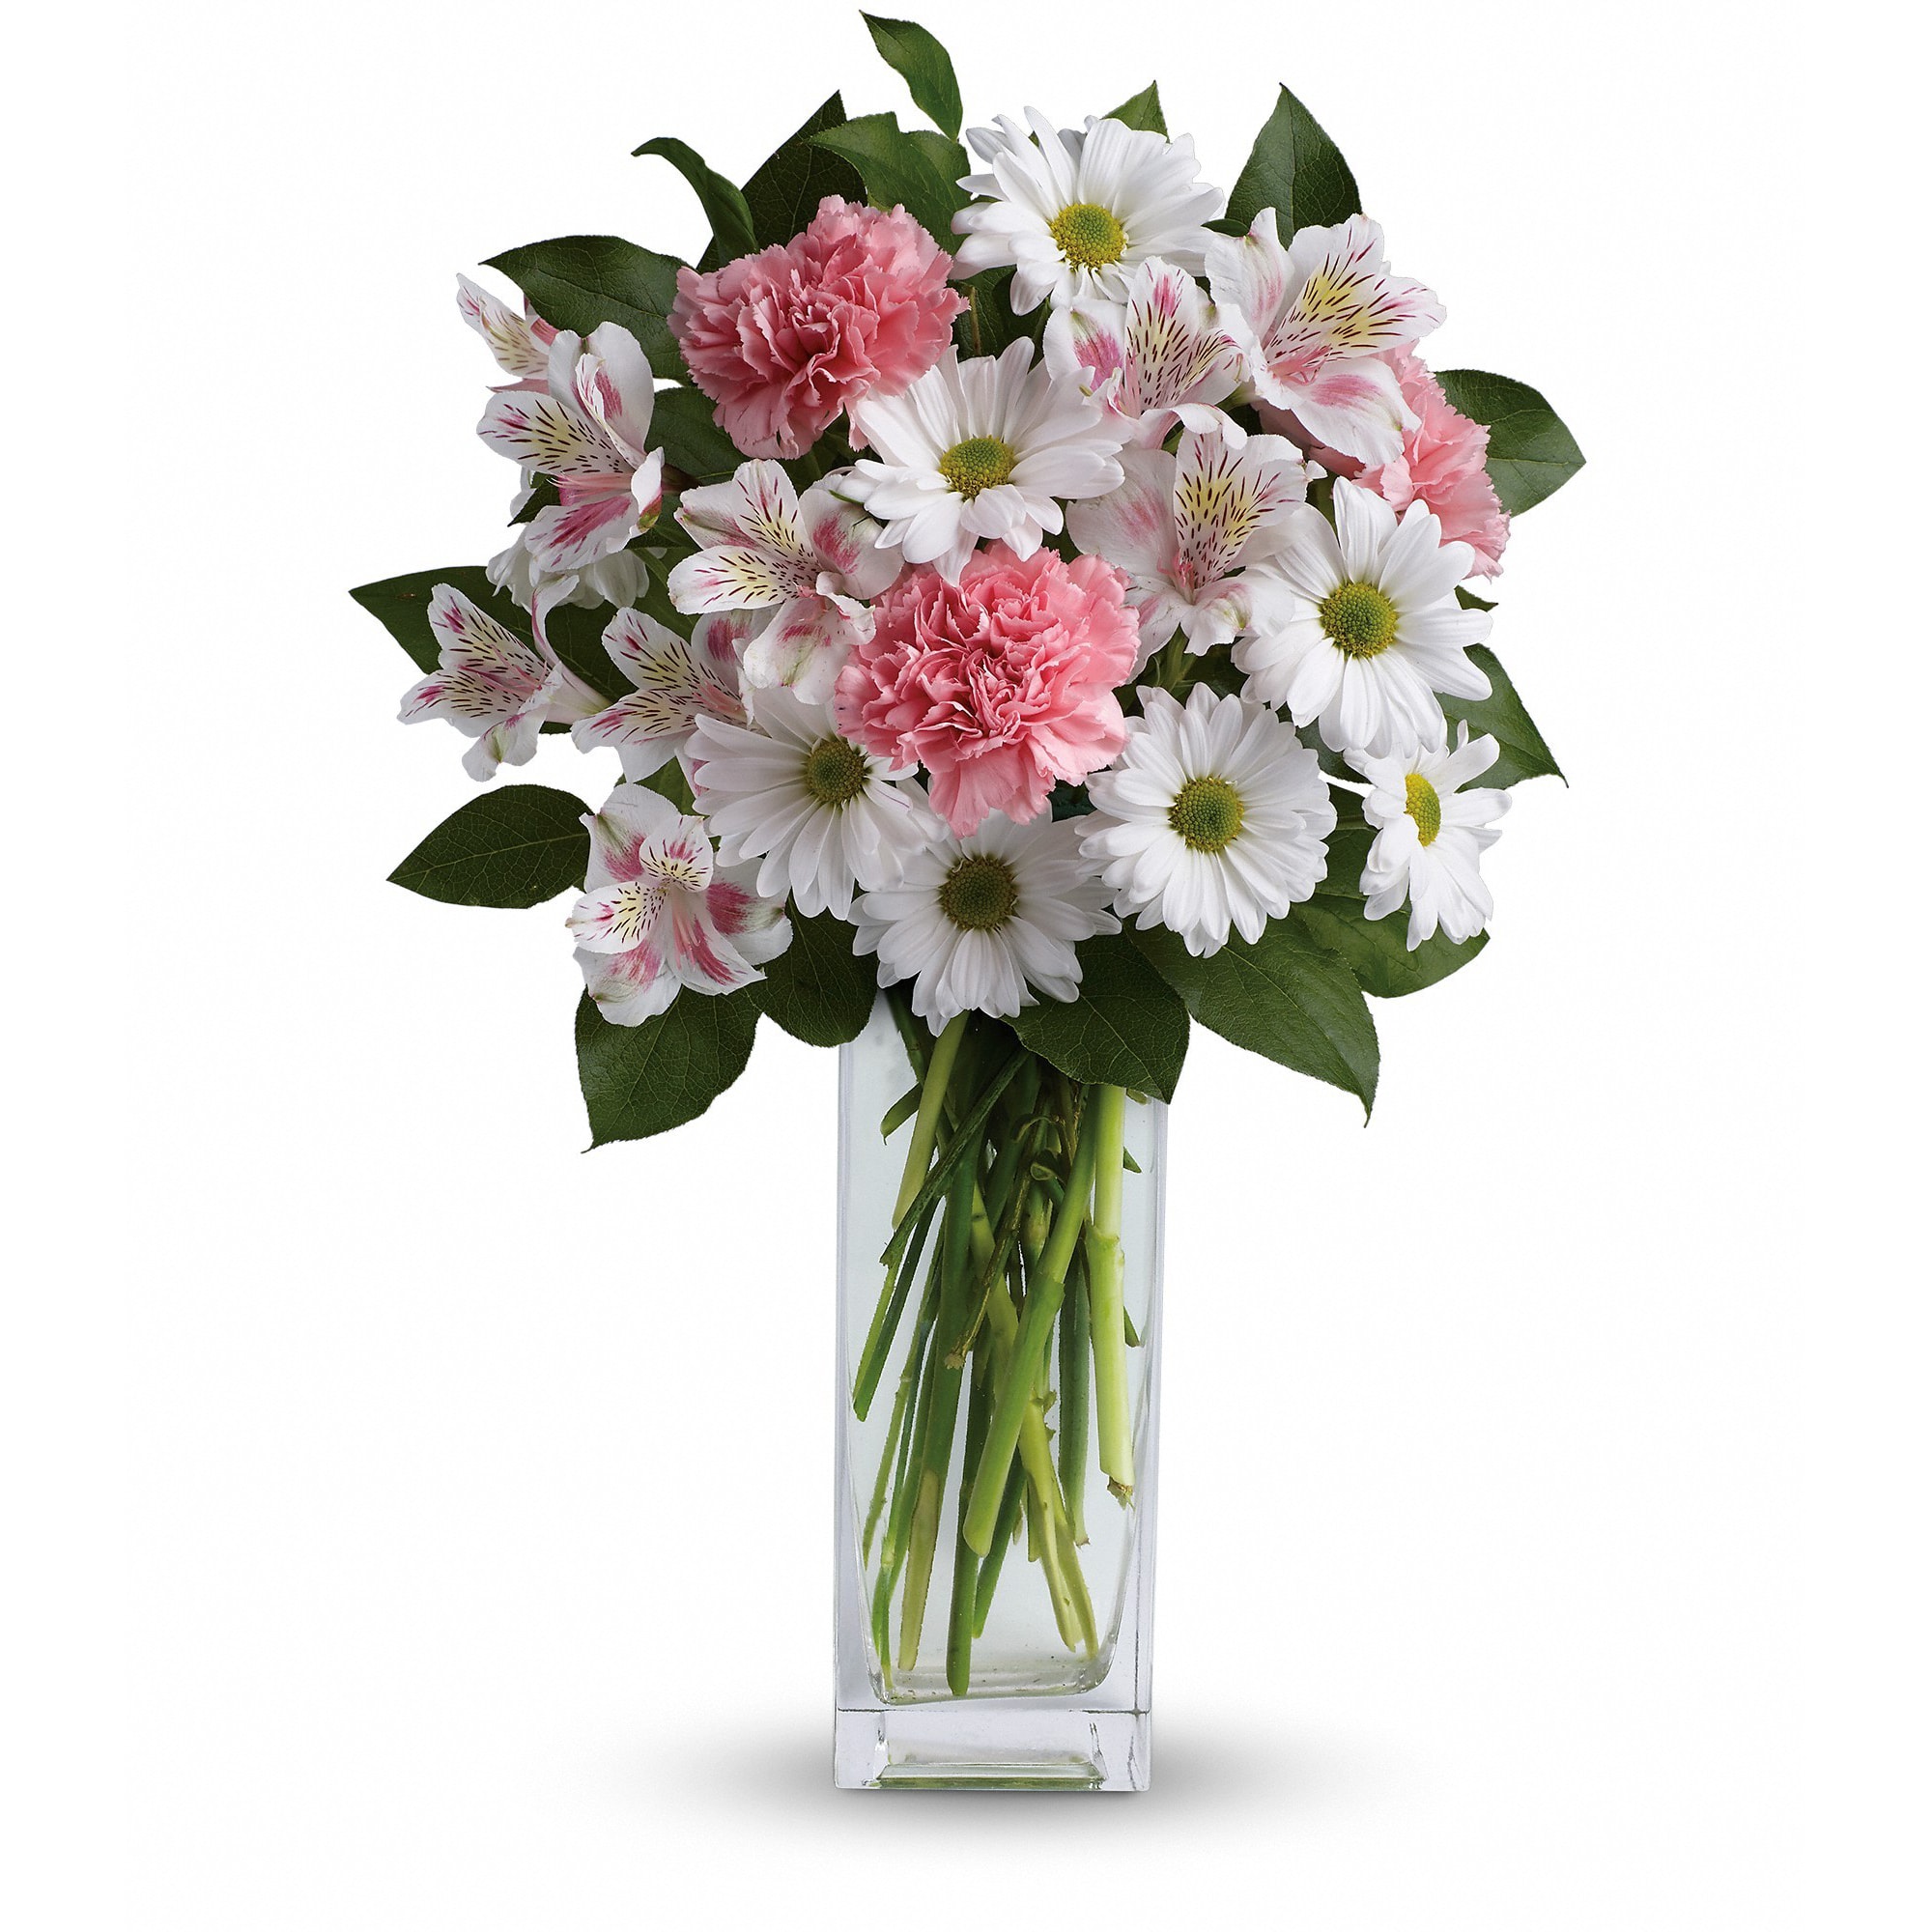 Sincerely Yours  - Soft and delicate, this pale pink and white bouquet speaks to the purity and simplicity of your adoration. 